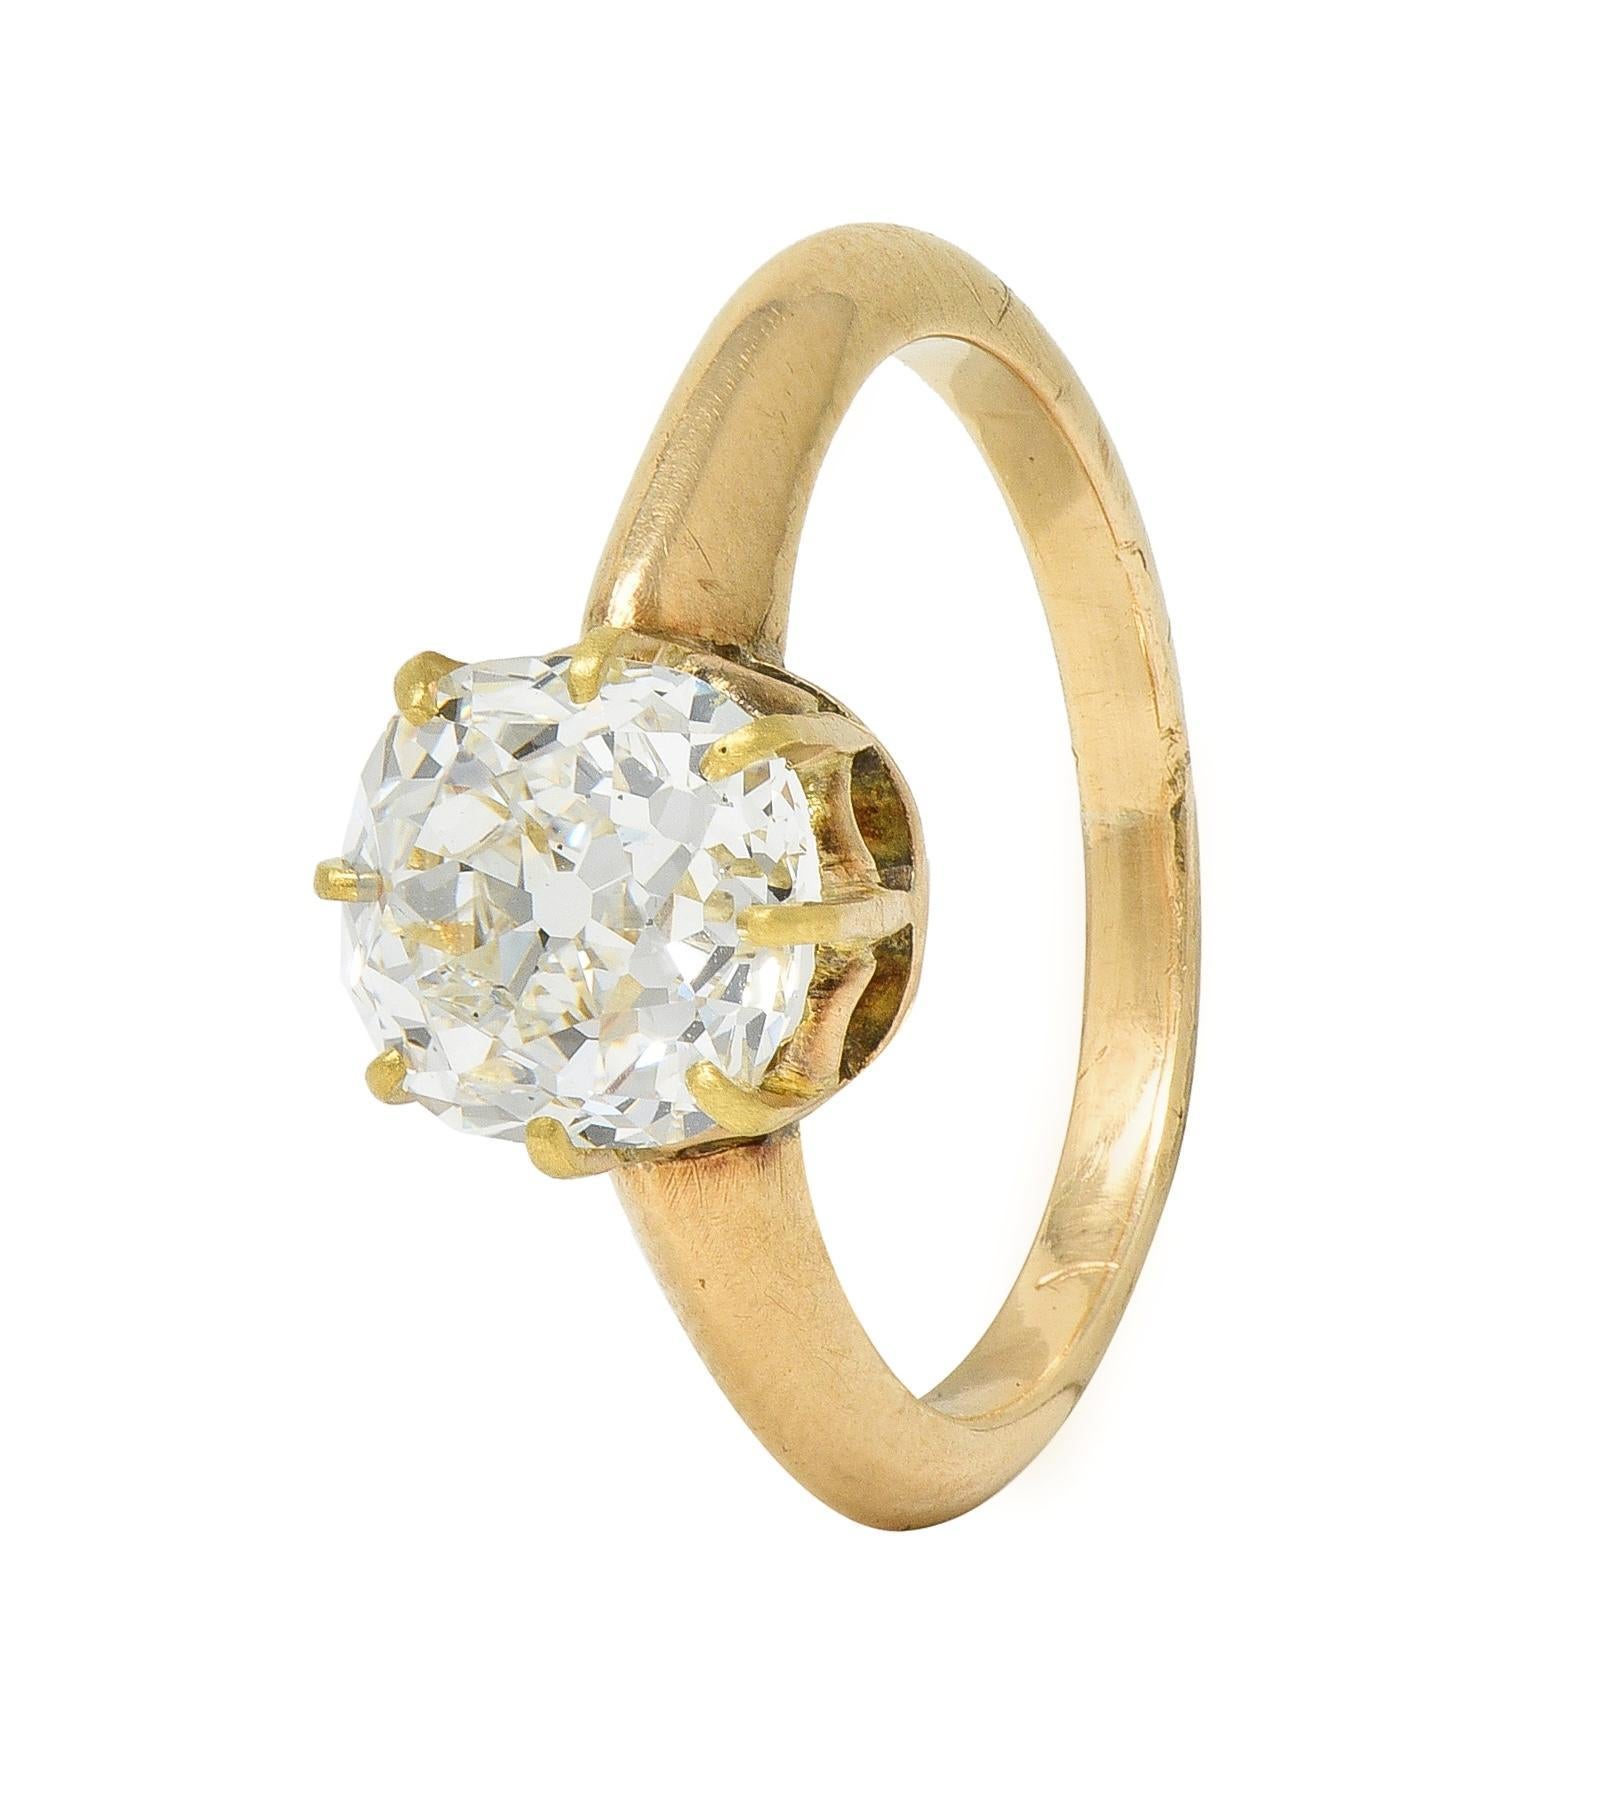 Centering an old mine cut diamond weighing 2.11 carat - G color with SI1 clarity
Set in an eight pronged mounting with pierced arch motif gallery 
Flanked by subtle knife edge shoulders
Tested as 14 karat gold
Circa: 1880s
Ring size: 5 and